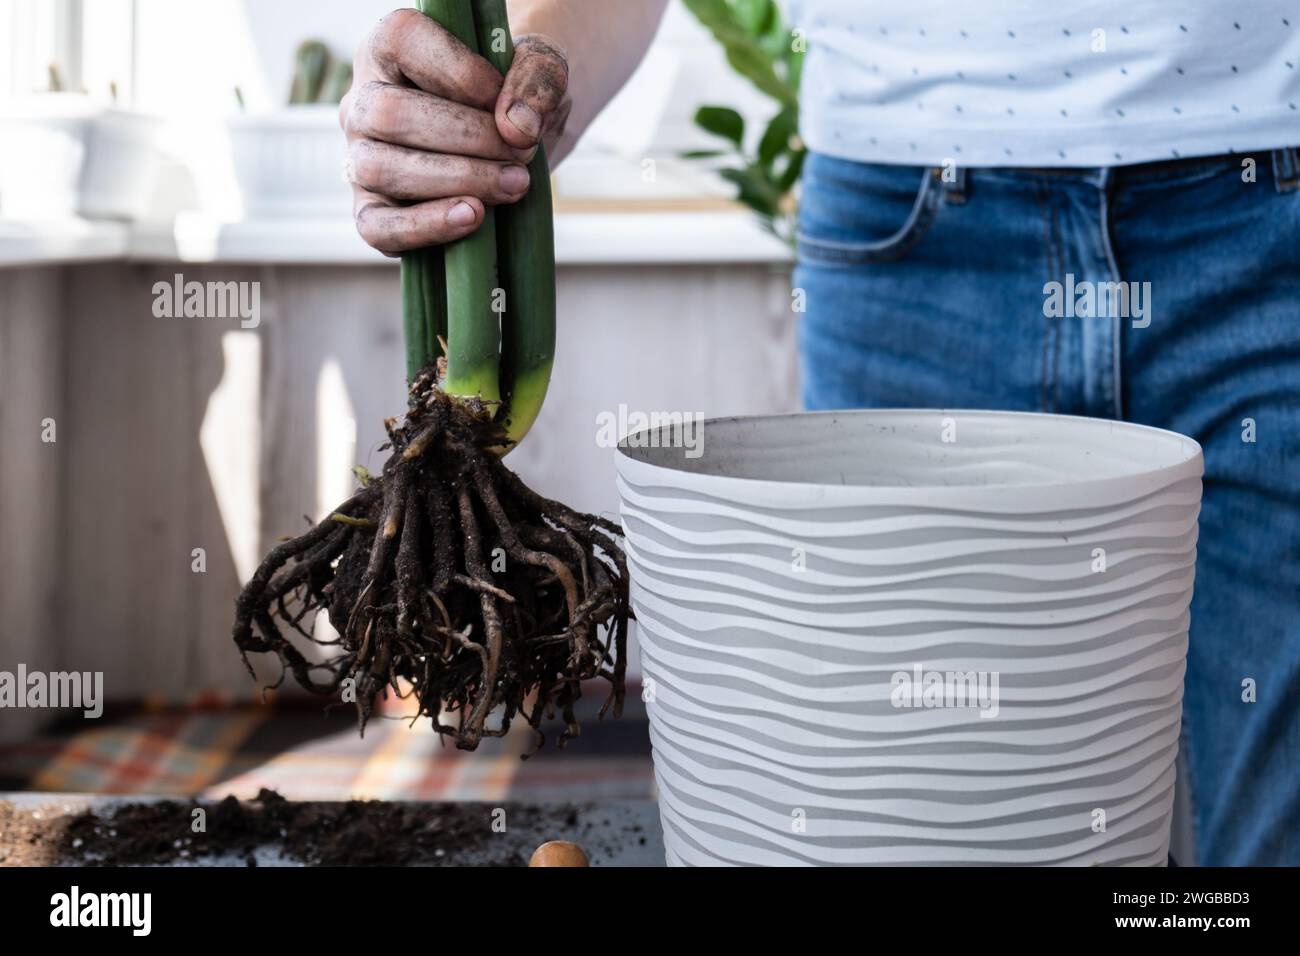 Man doing replant zamioculcas to new pot at home. Cleaning roots. Pulling plant with roots from pot, close-up. Florist gardening at home. Leisure free time hobby Stock Photo